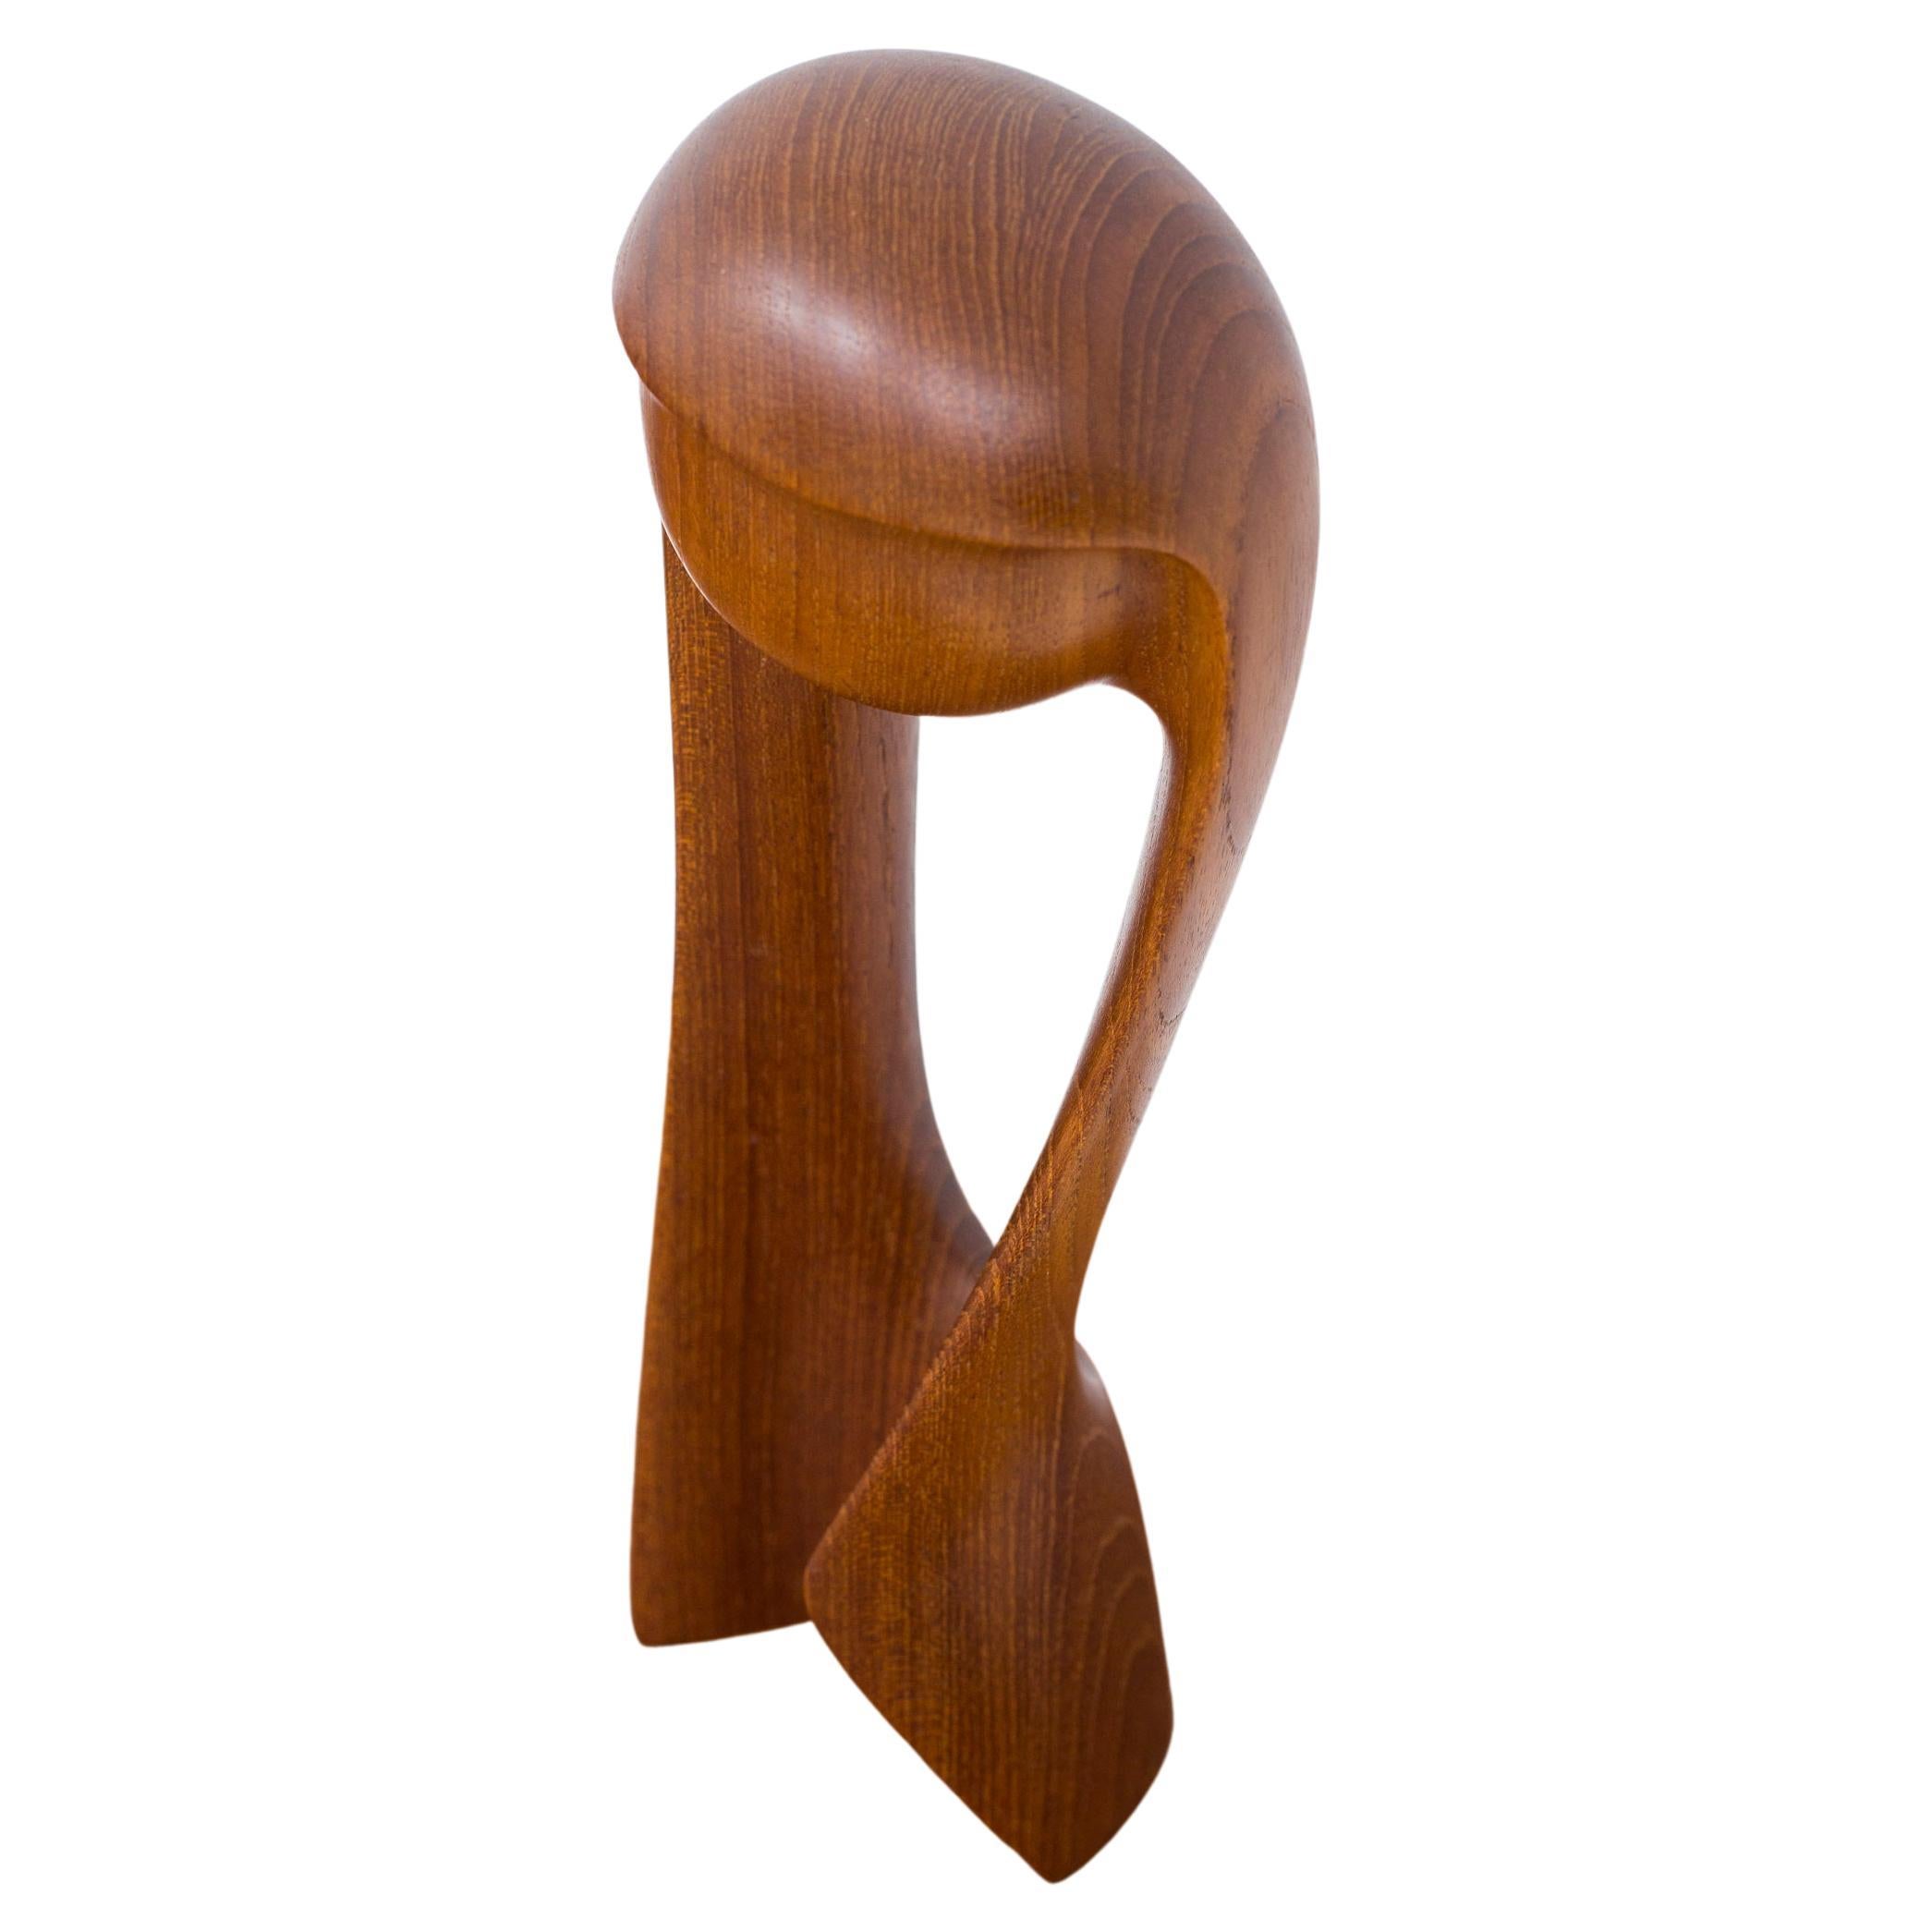 Teak Sculpture by Simon Randers, Produced in Denmark During the, 1950s